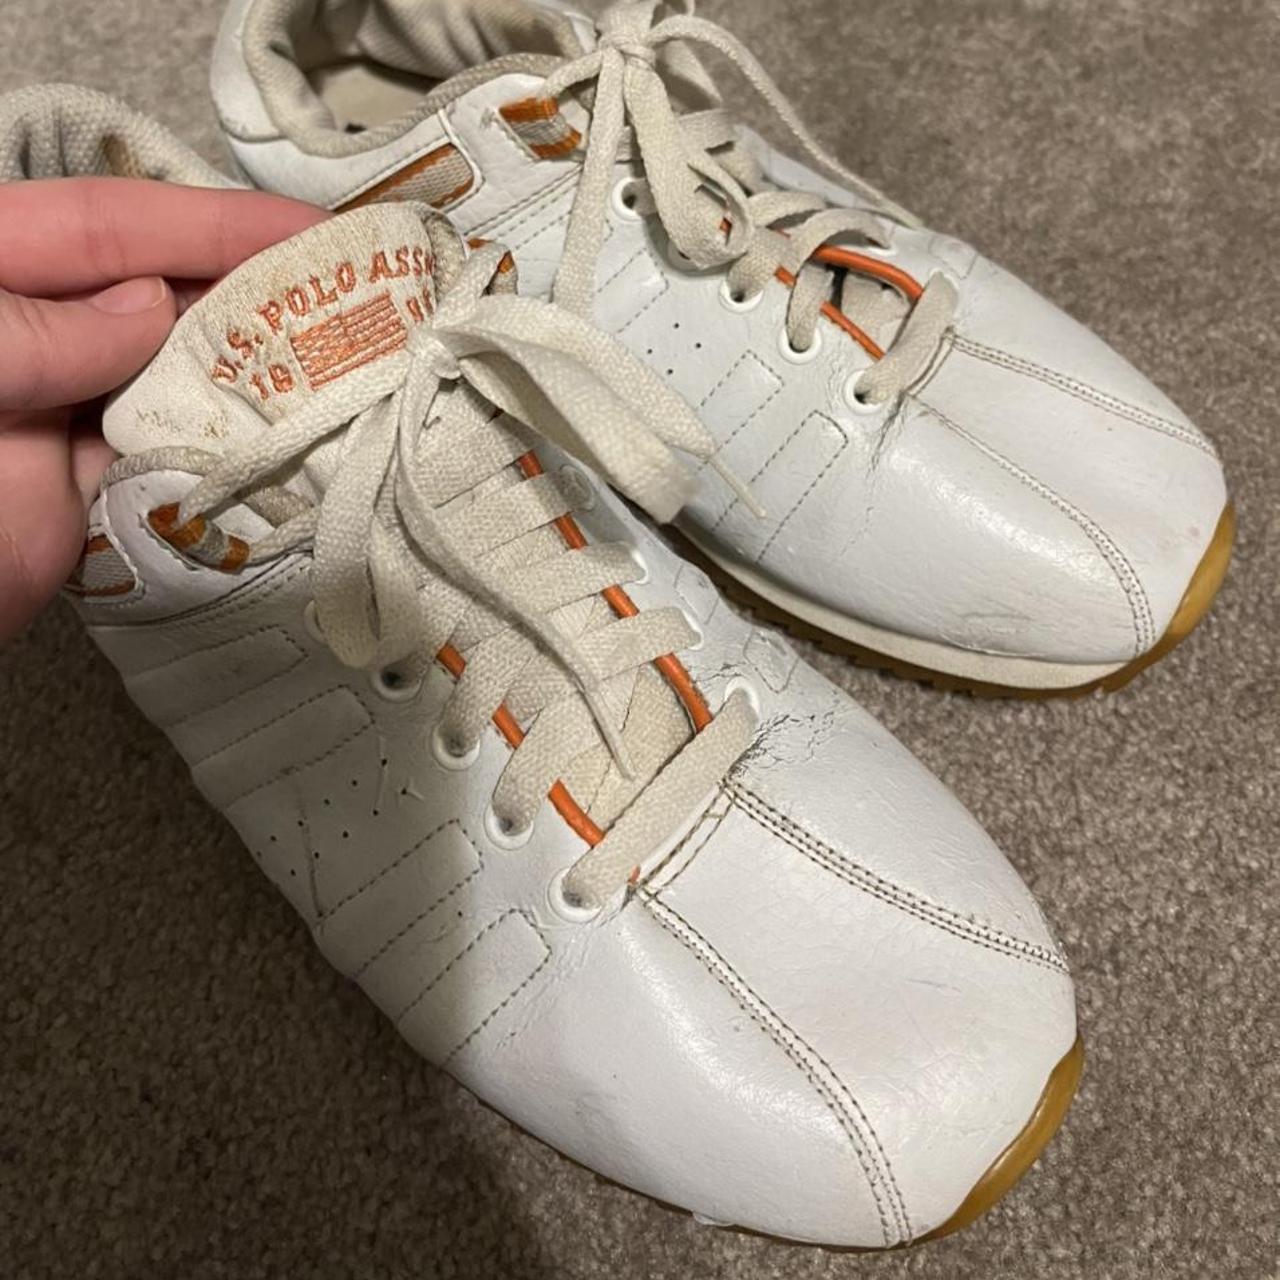 U.S. Polo Assn. Women's White and Orange Trainers (4)